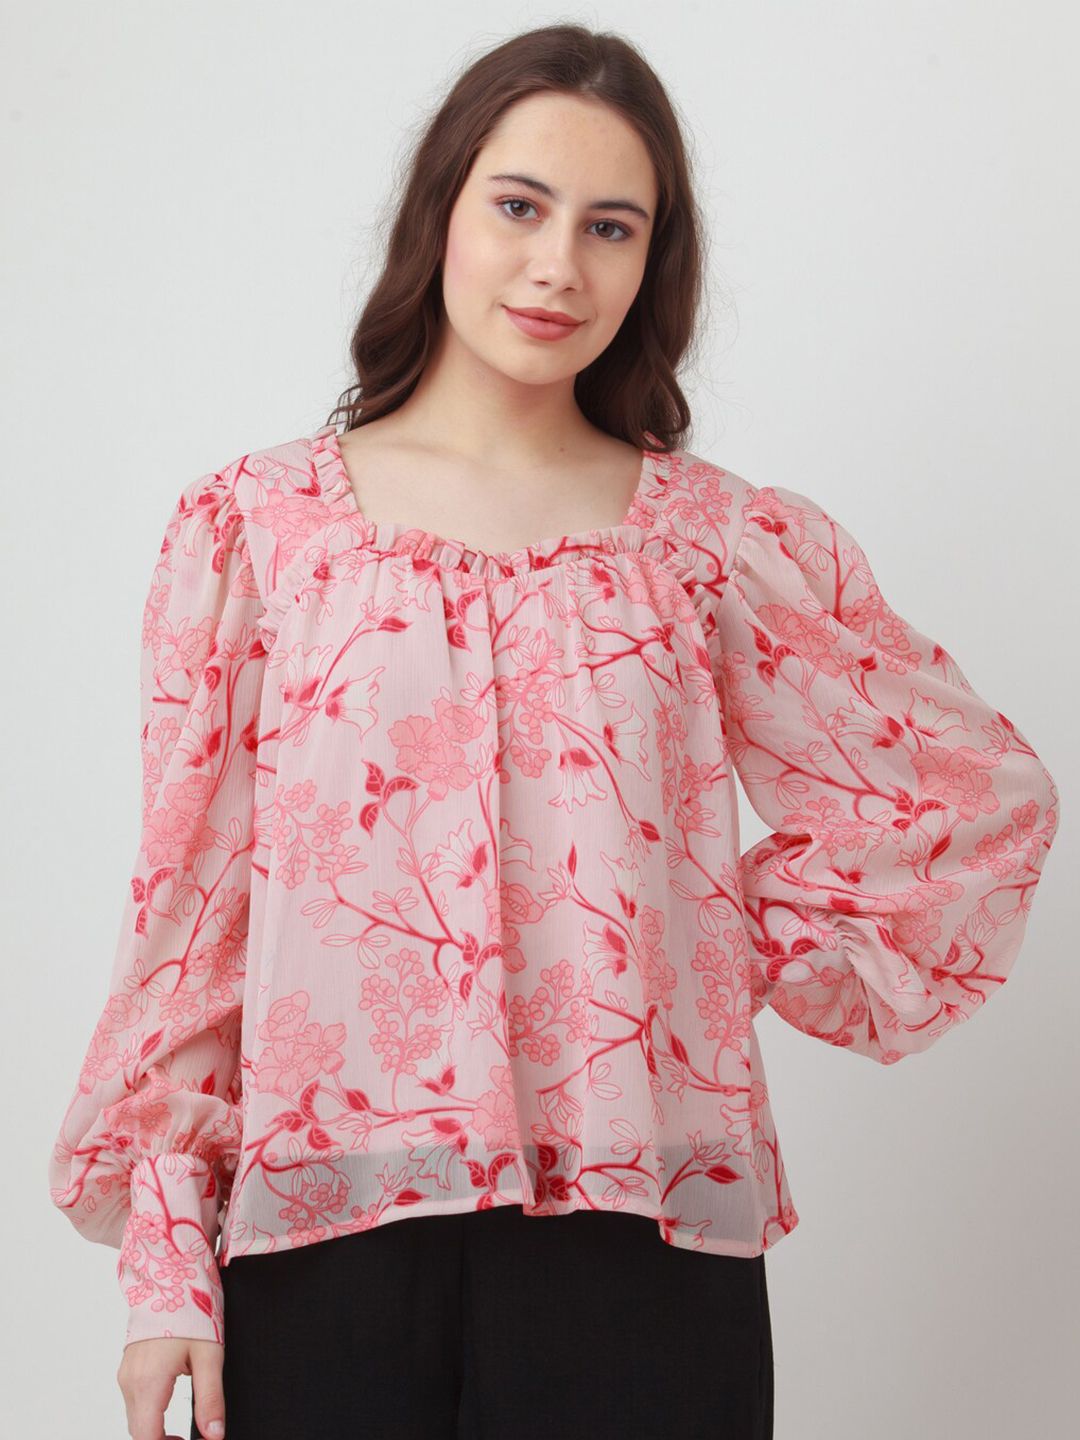 Zink London Pink & Red Floral Print Cuffed Sleeves Top Price in India